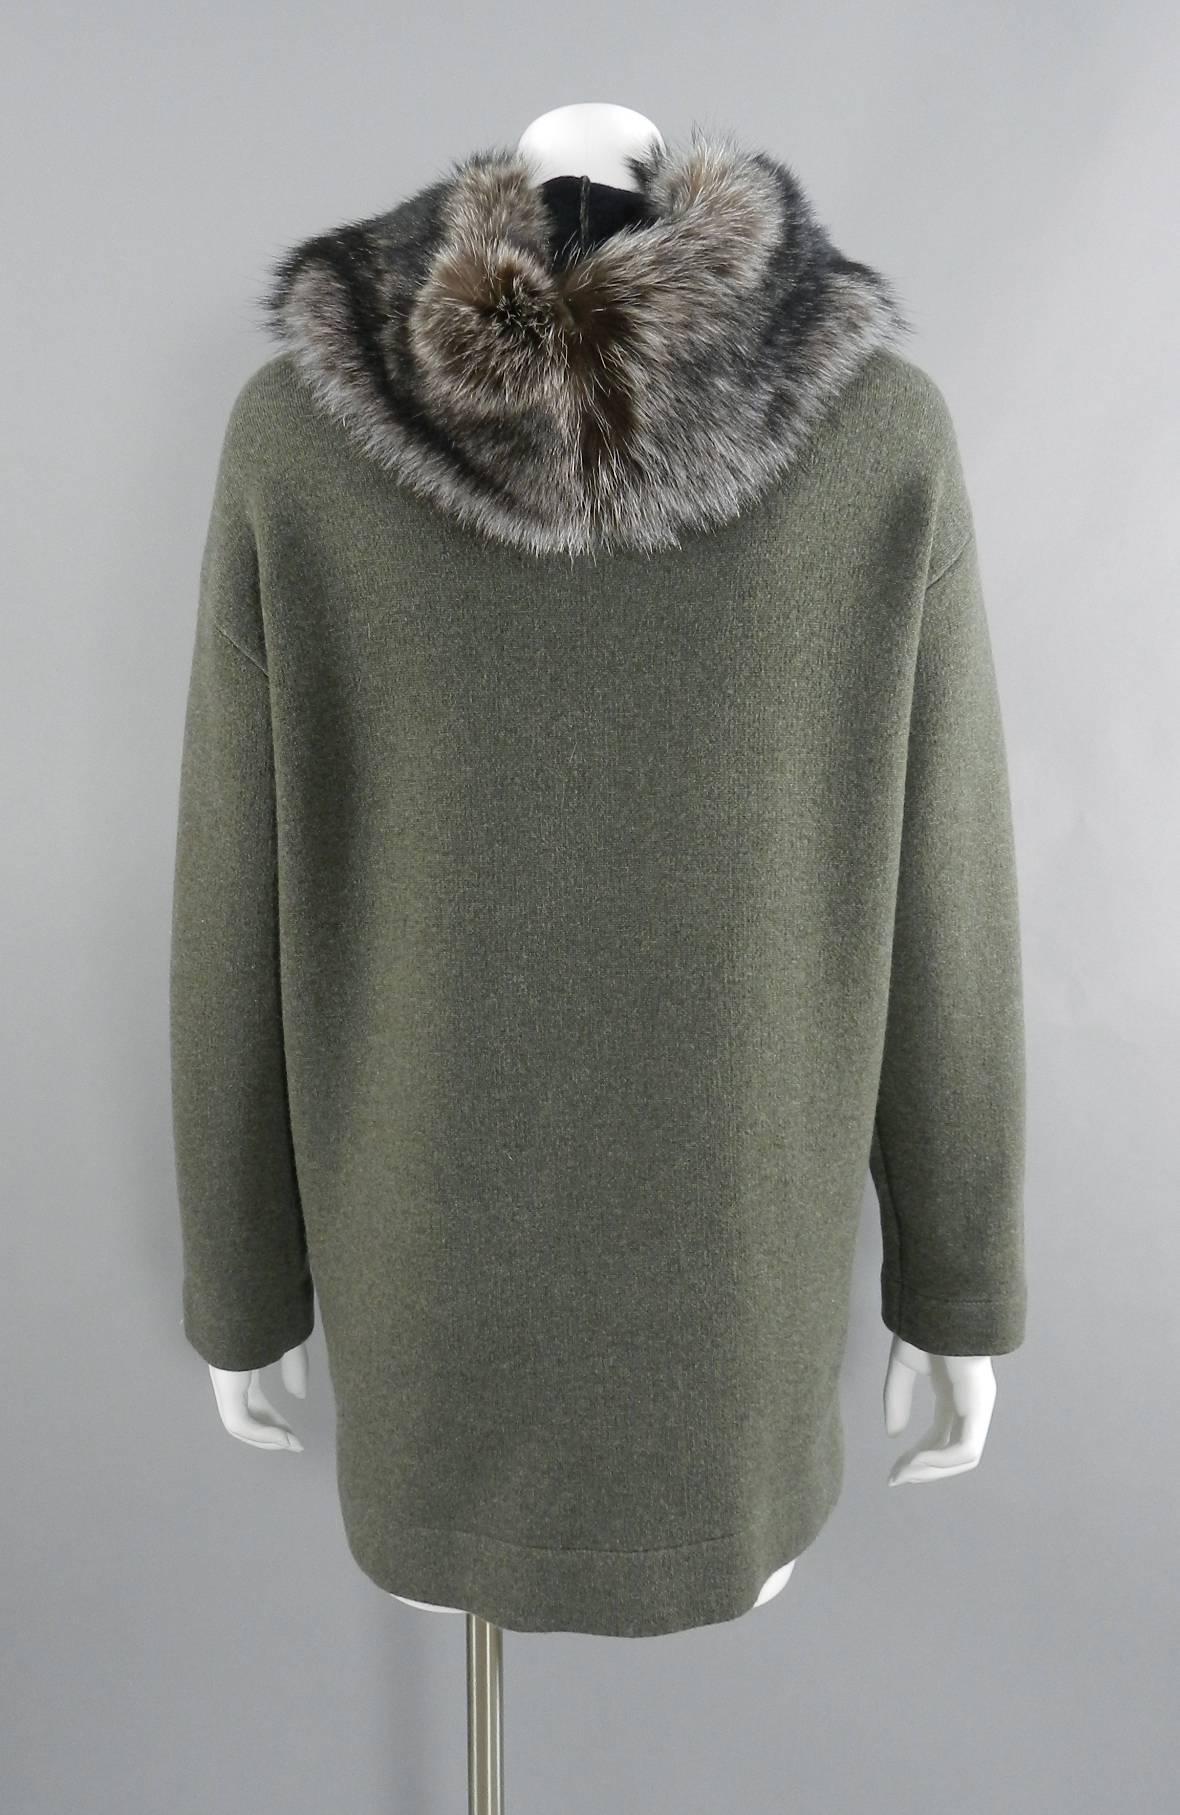 Gray Brunello Cucinelli Cashmere Knit Sweater Coat with Fox Fur Hood